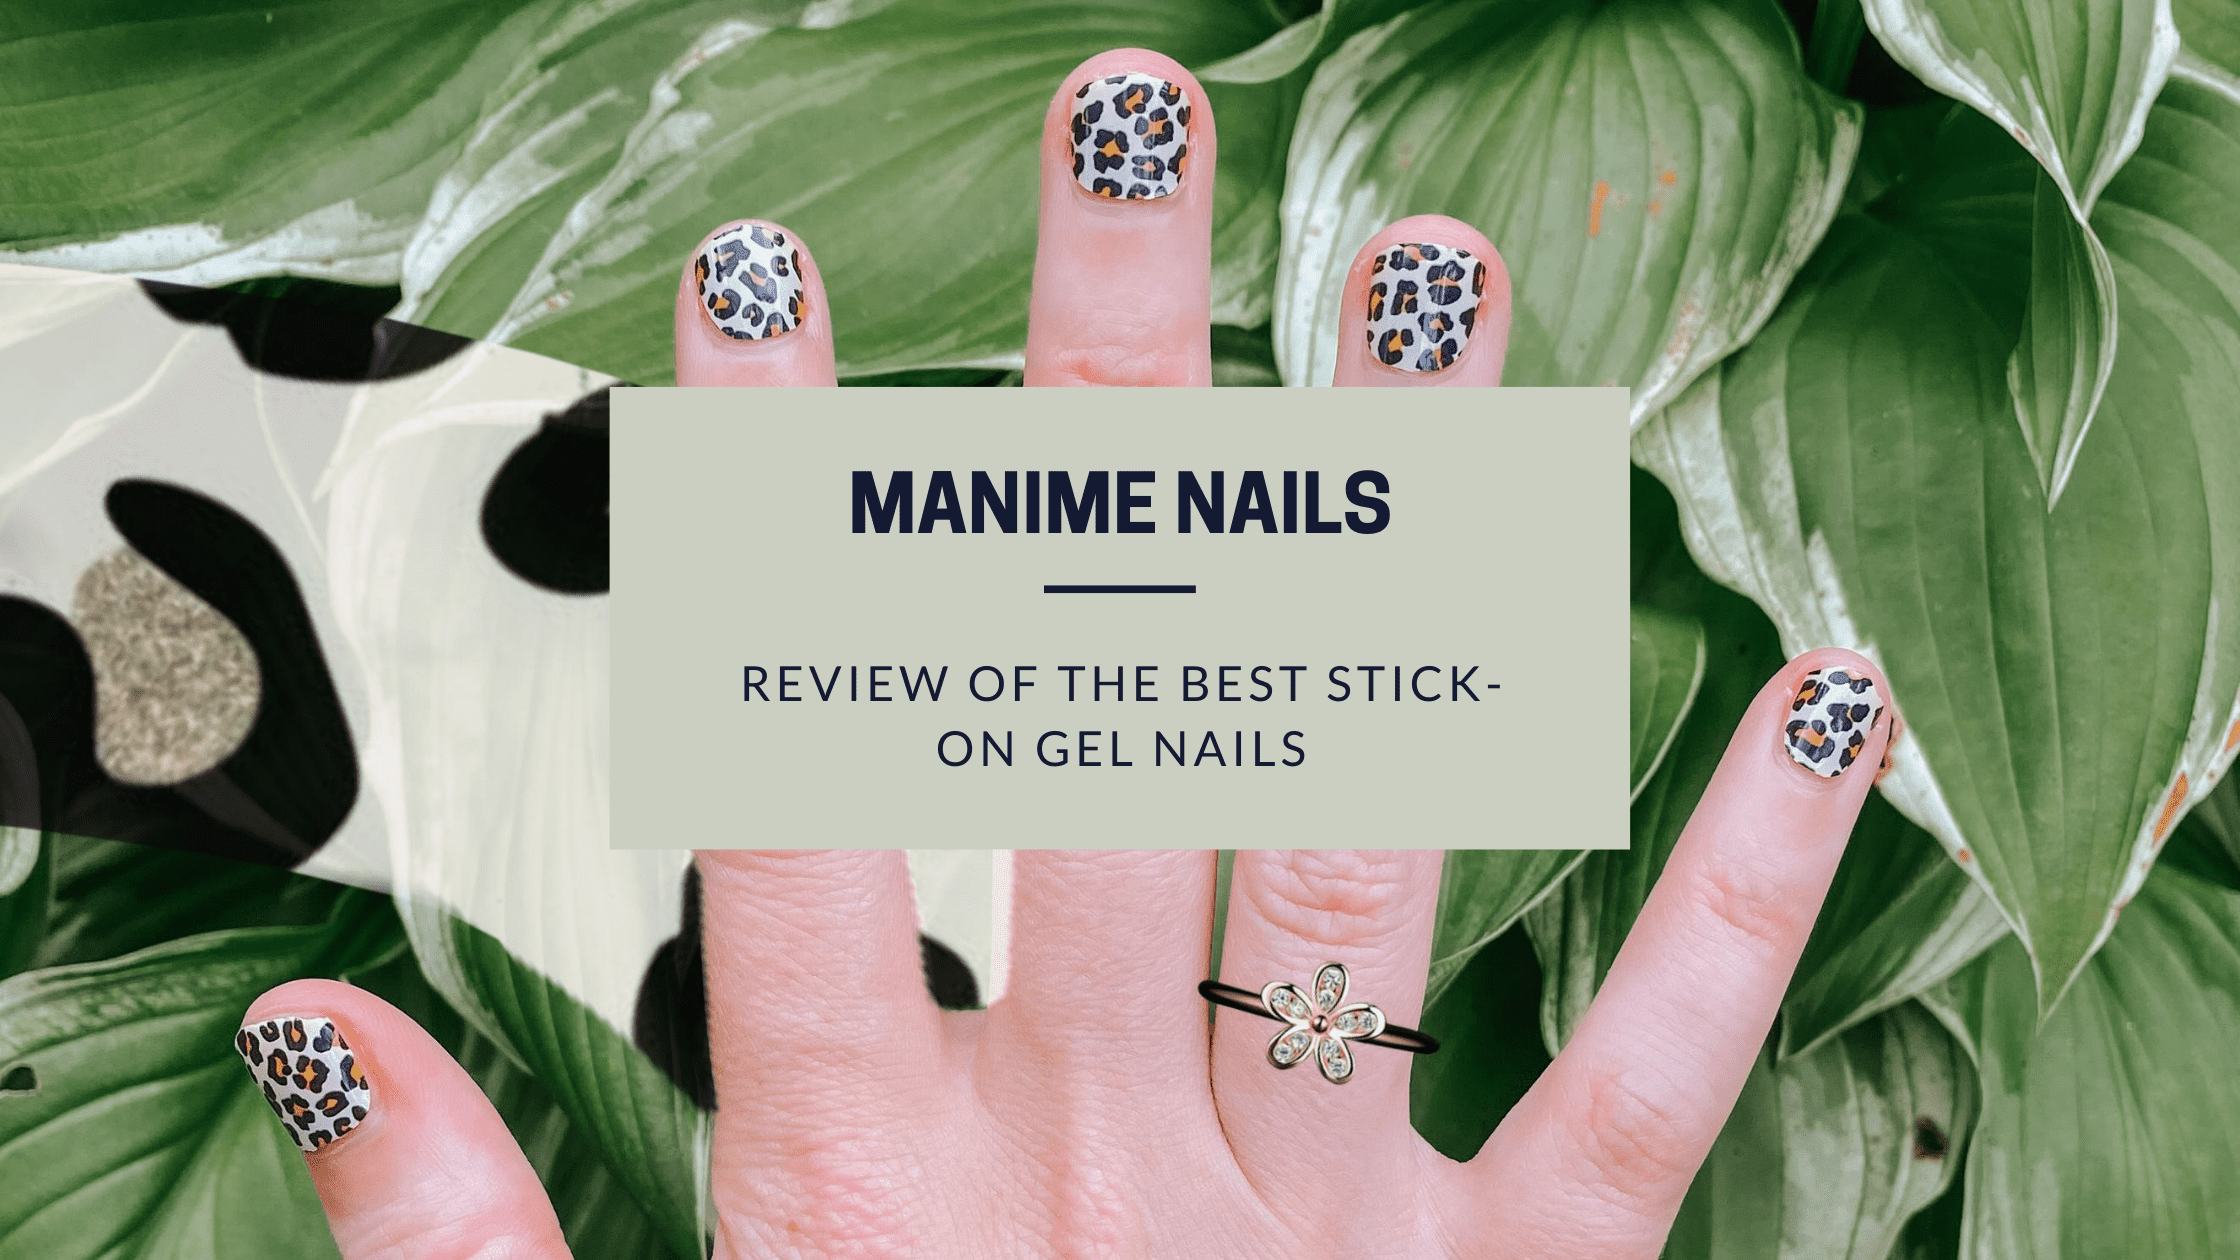 I TRIED DIY GEL NAILS AT HOME | MYLEE REVIEW - YouTube